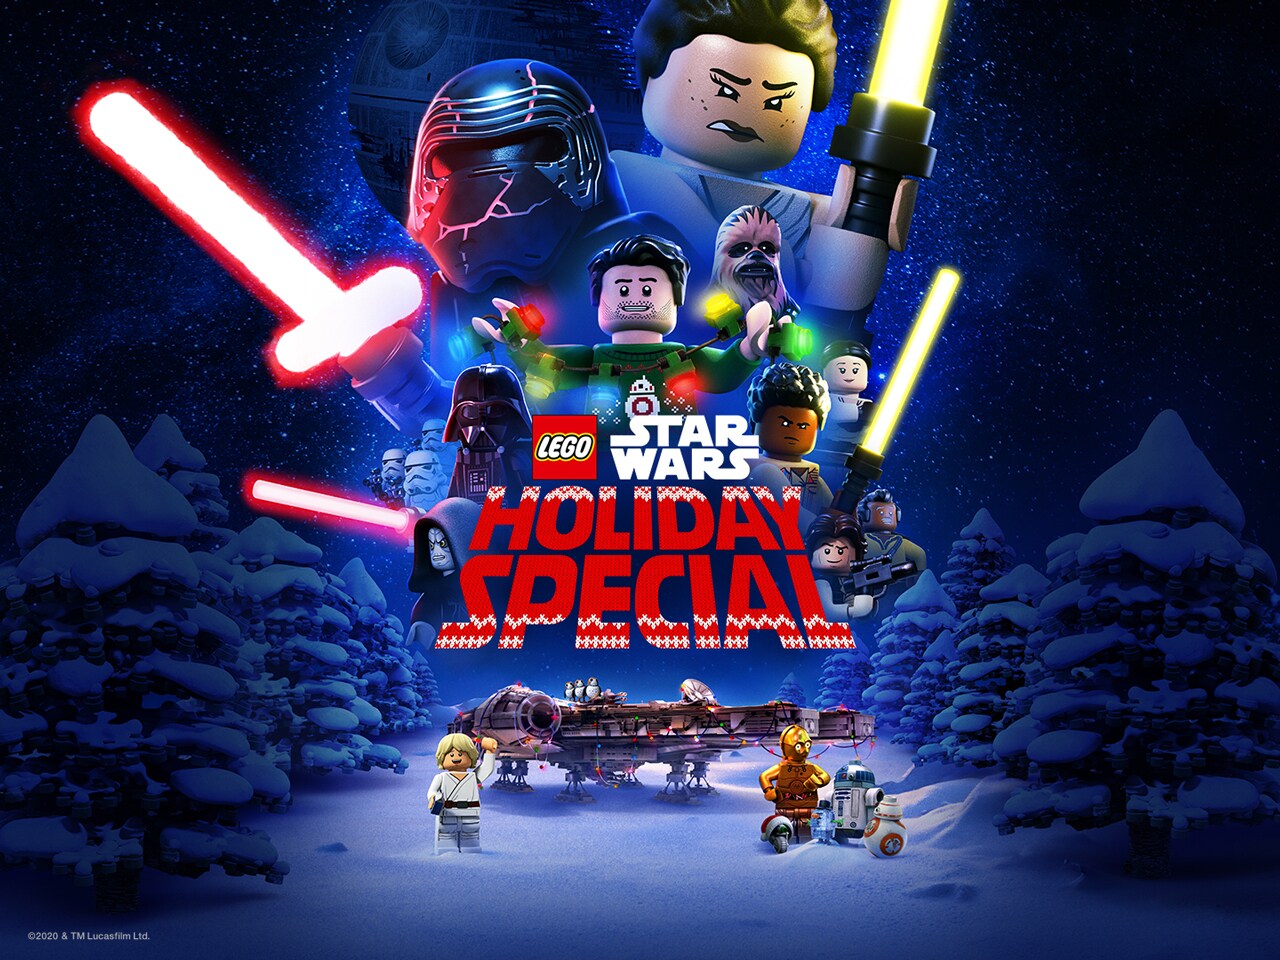 LEGO Star Wars Holiday Special logo and characters